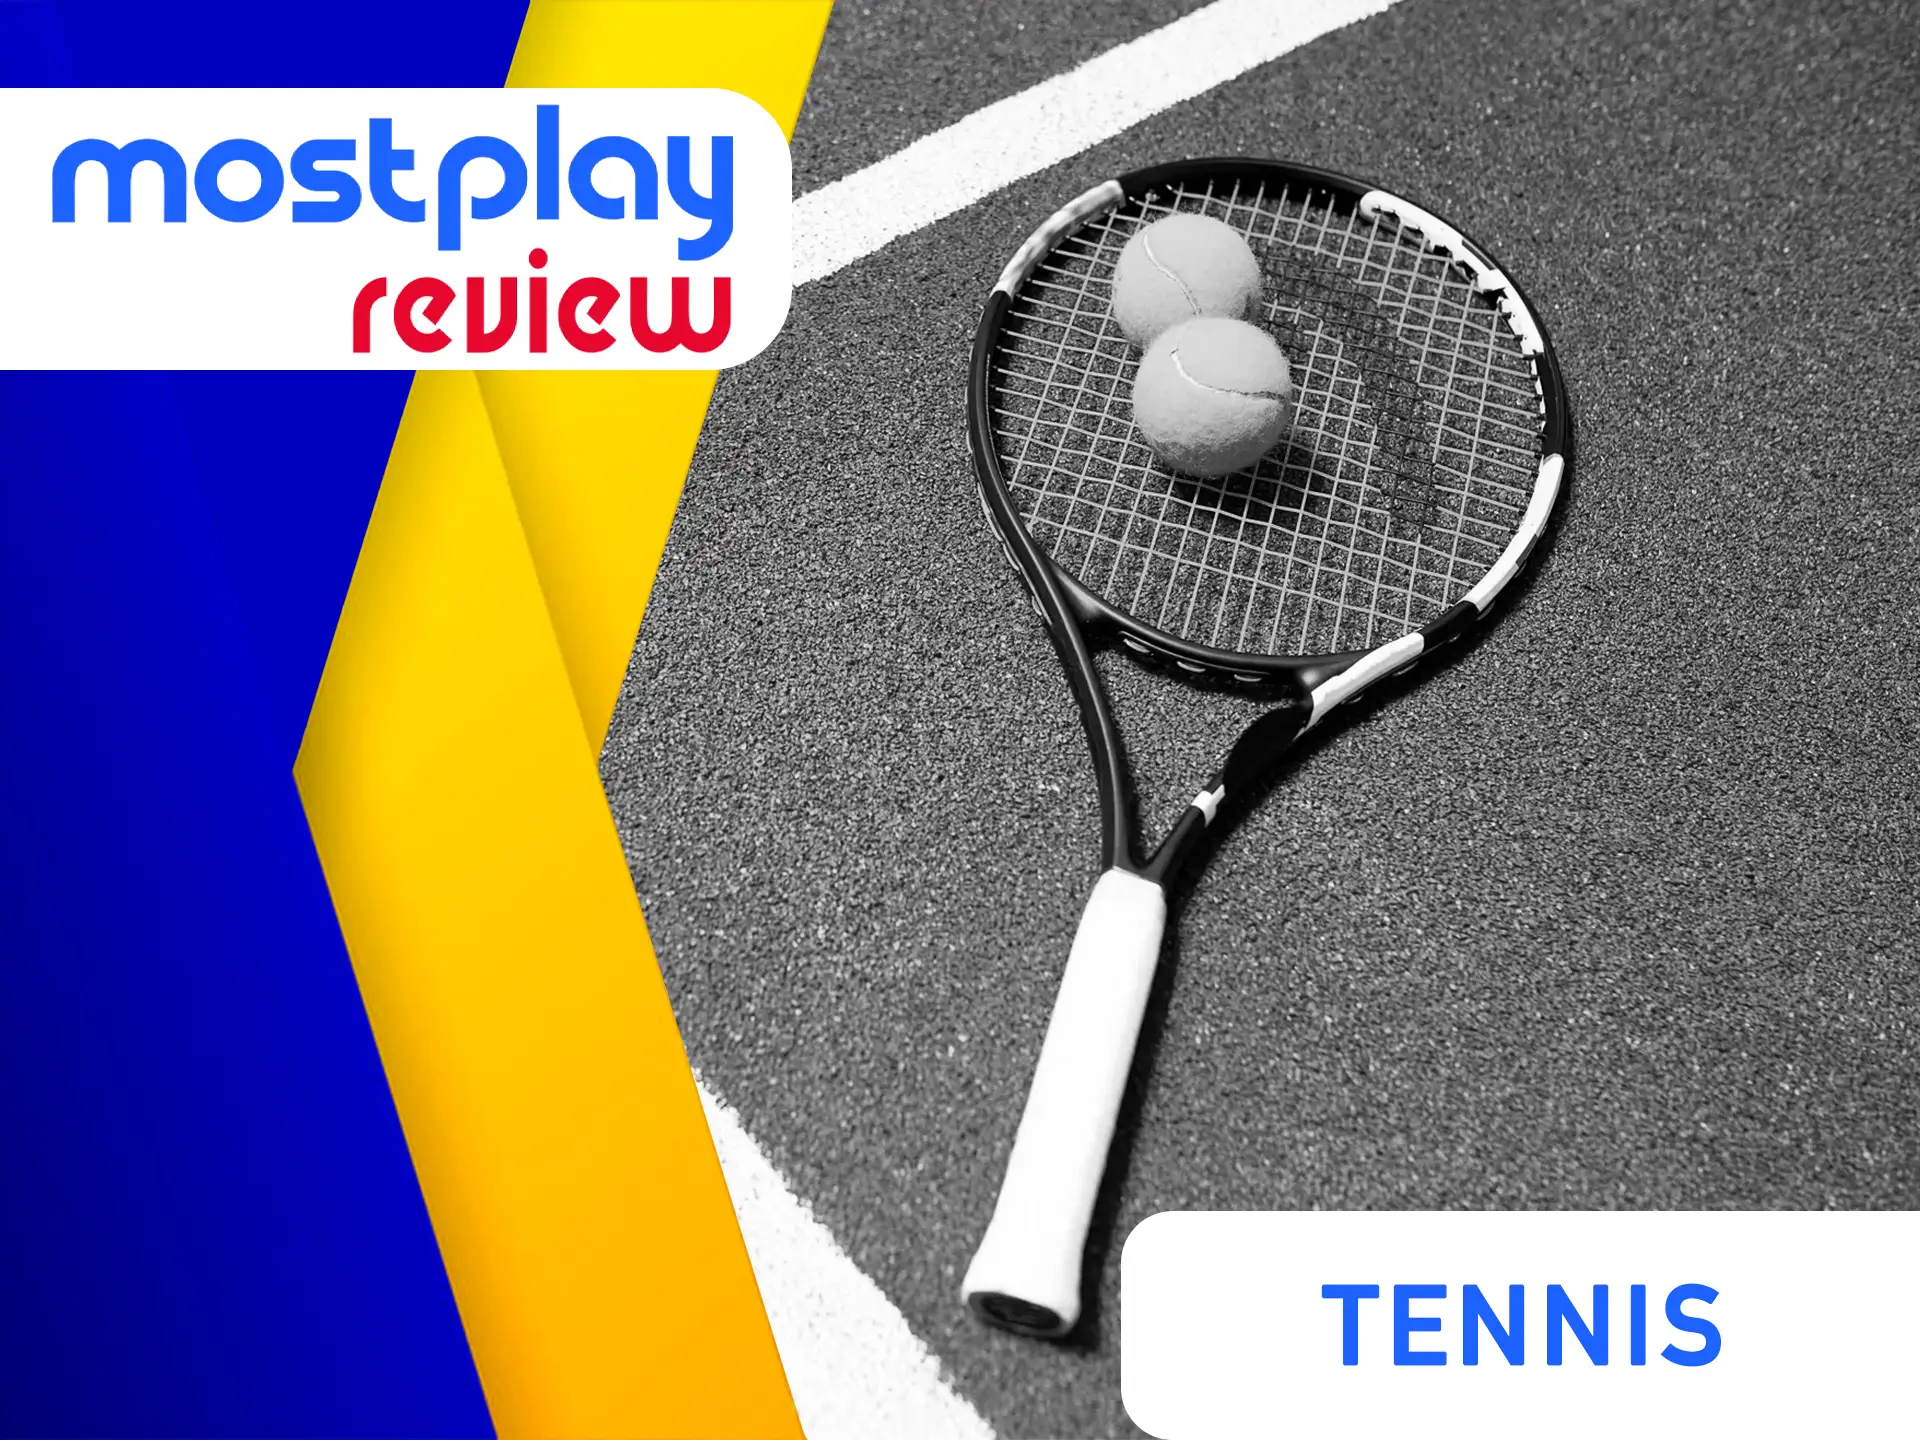 Watch how the greatest tennis players win you money at Mostplay.